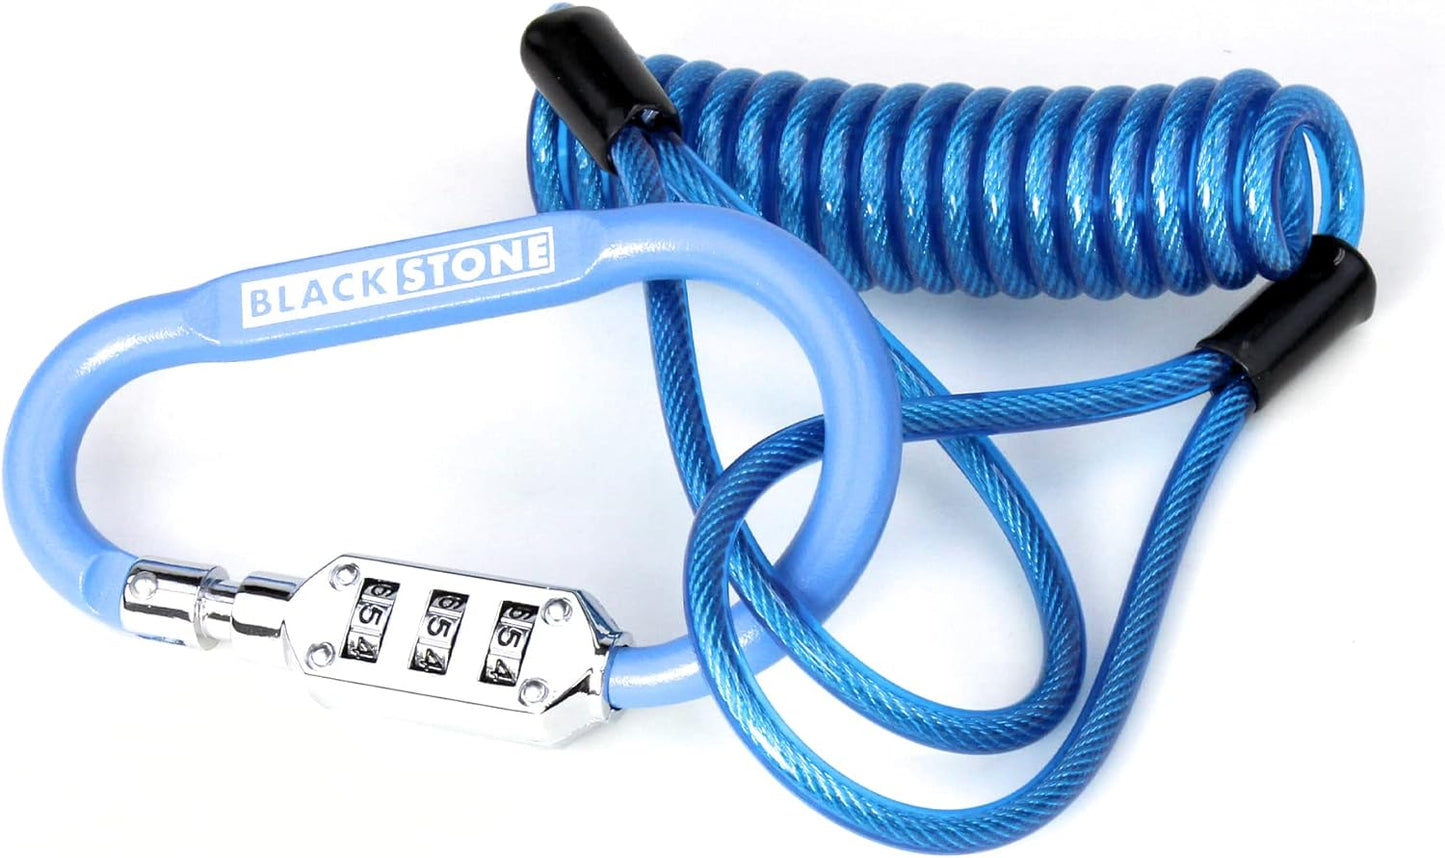 Blue Black Stone brand bike lock with combination padlock and coiled cable on a white background